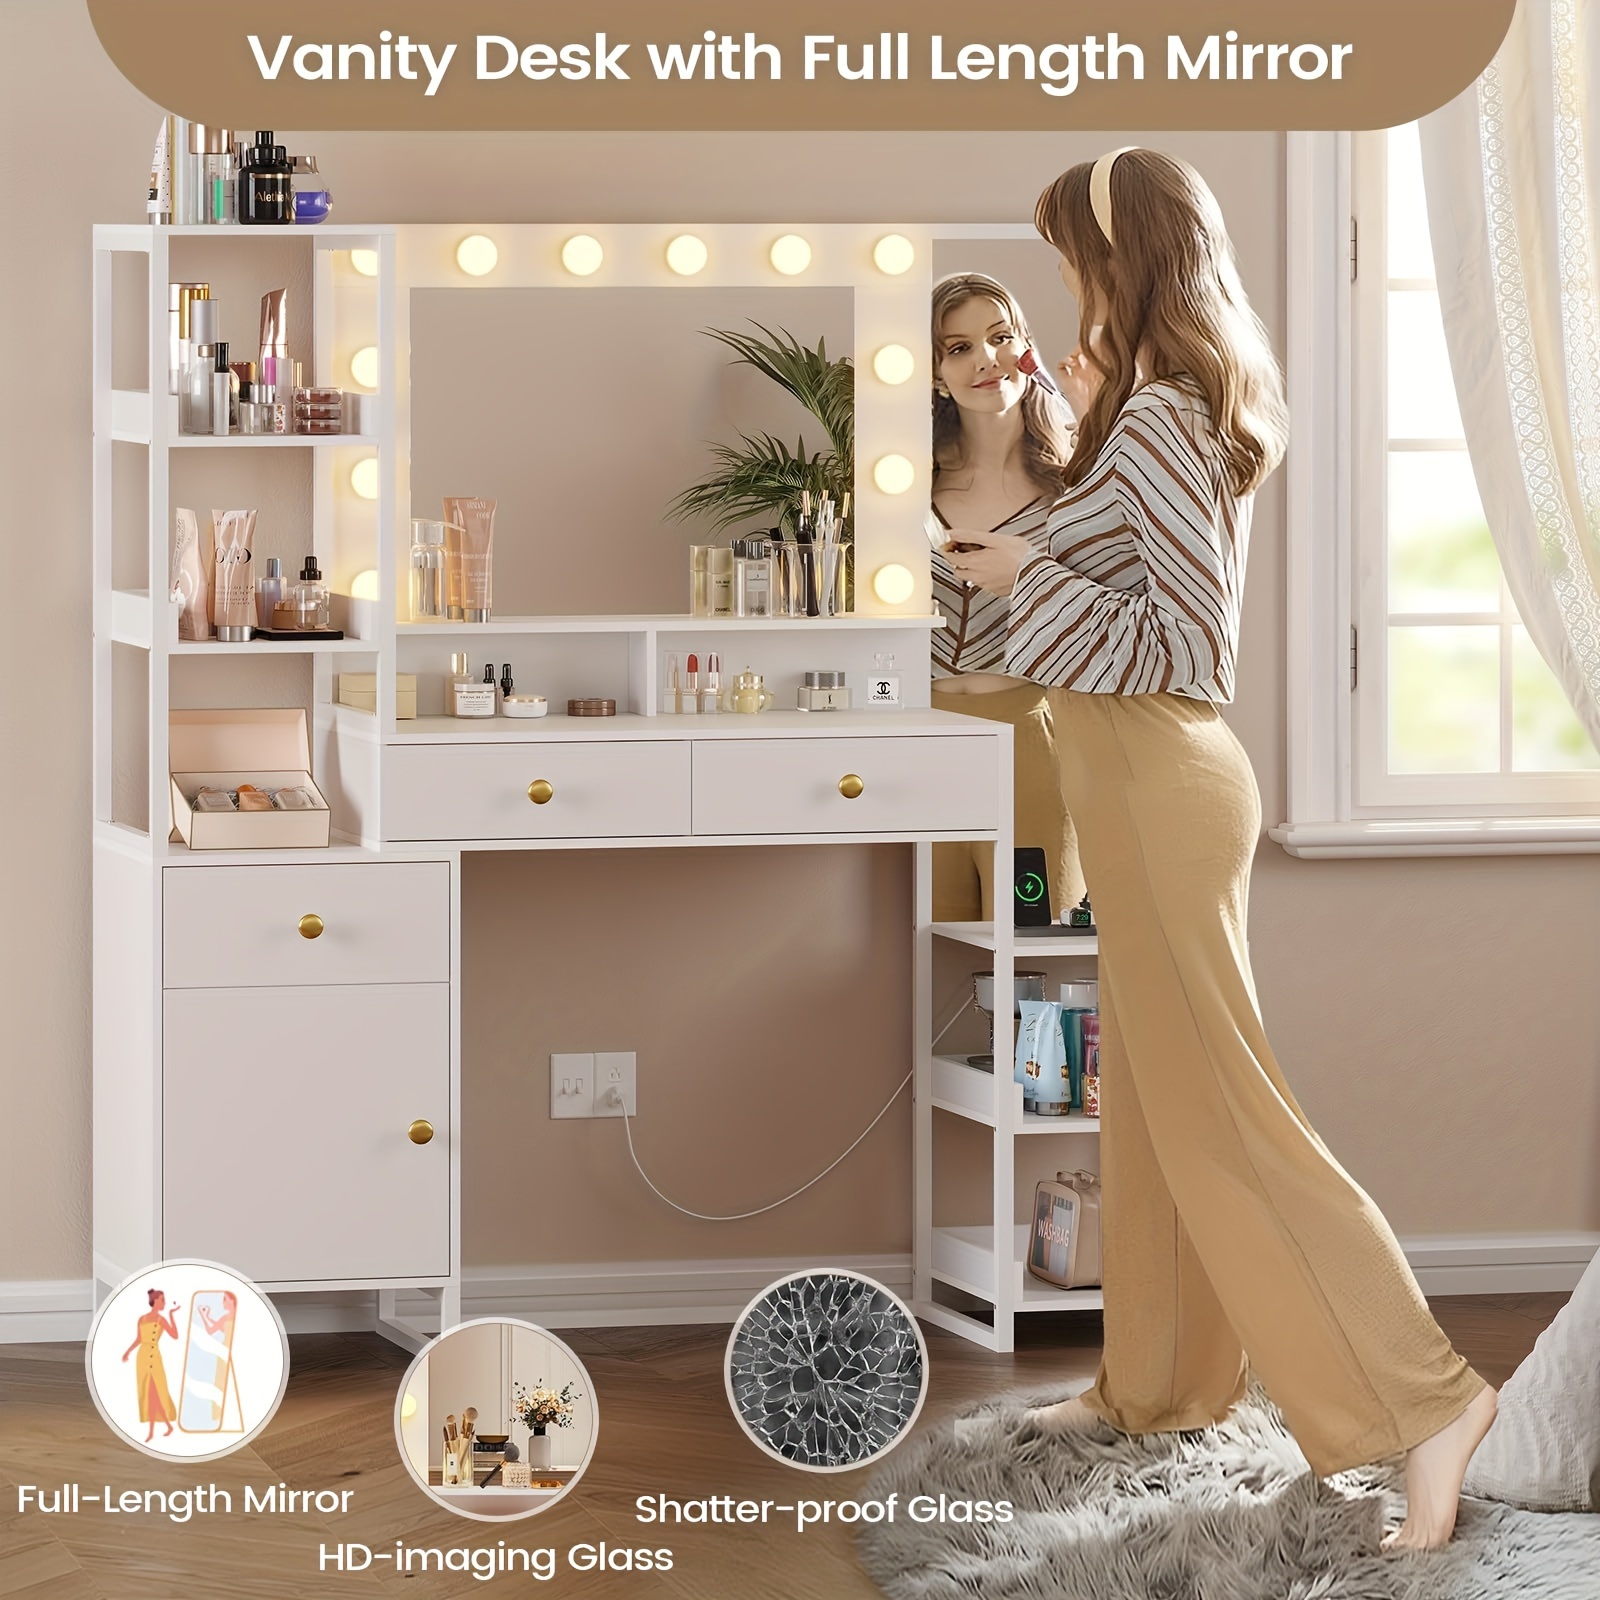 

1pcs Vanity Desk With Full-length Mirror, Makeup Vanity Lights Mirror And Charging Station, Large White Makeup Table With Drawers And Shelves